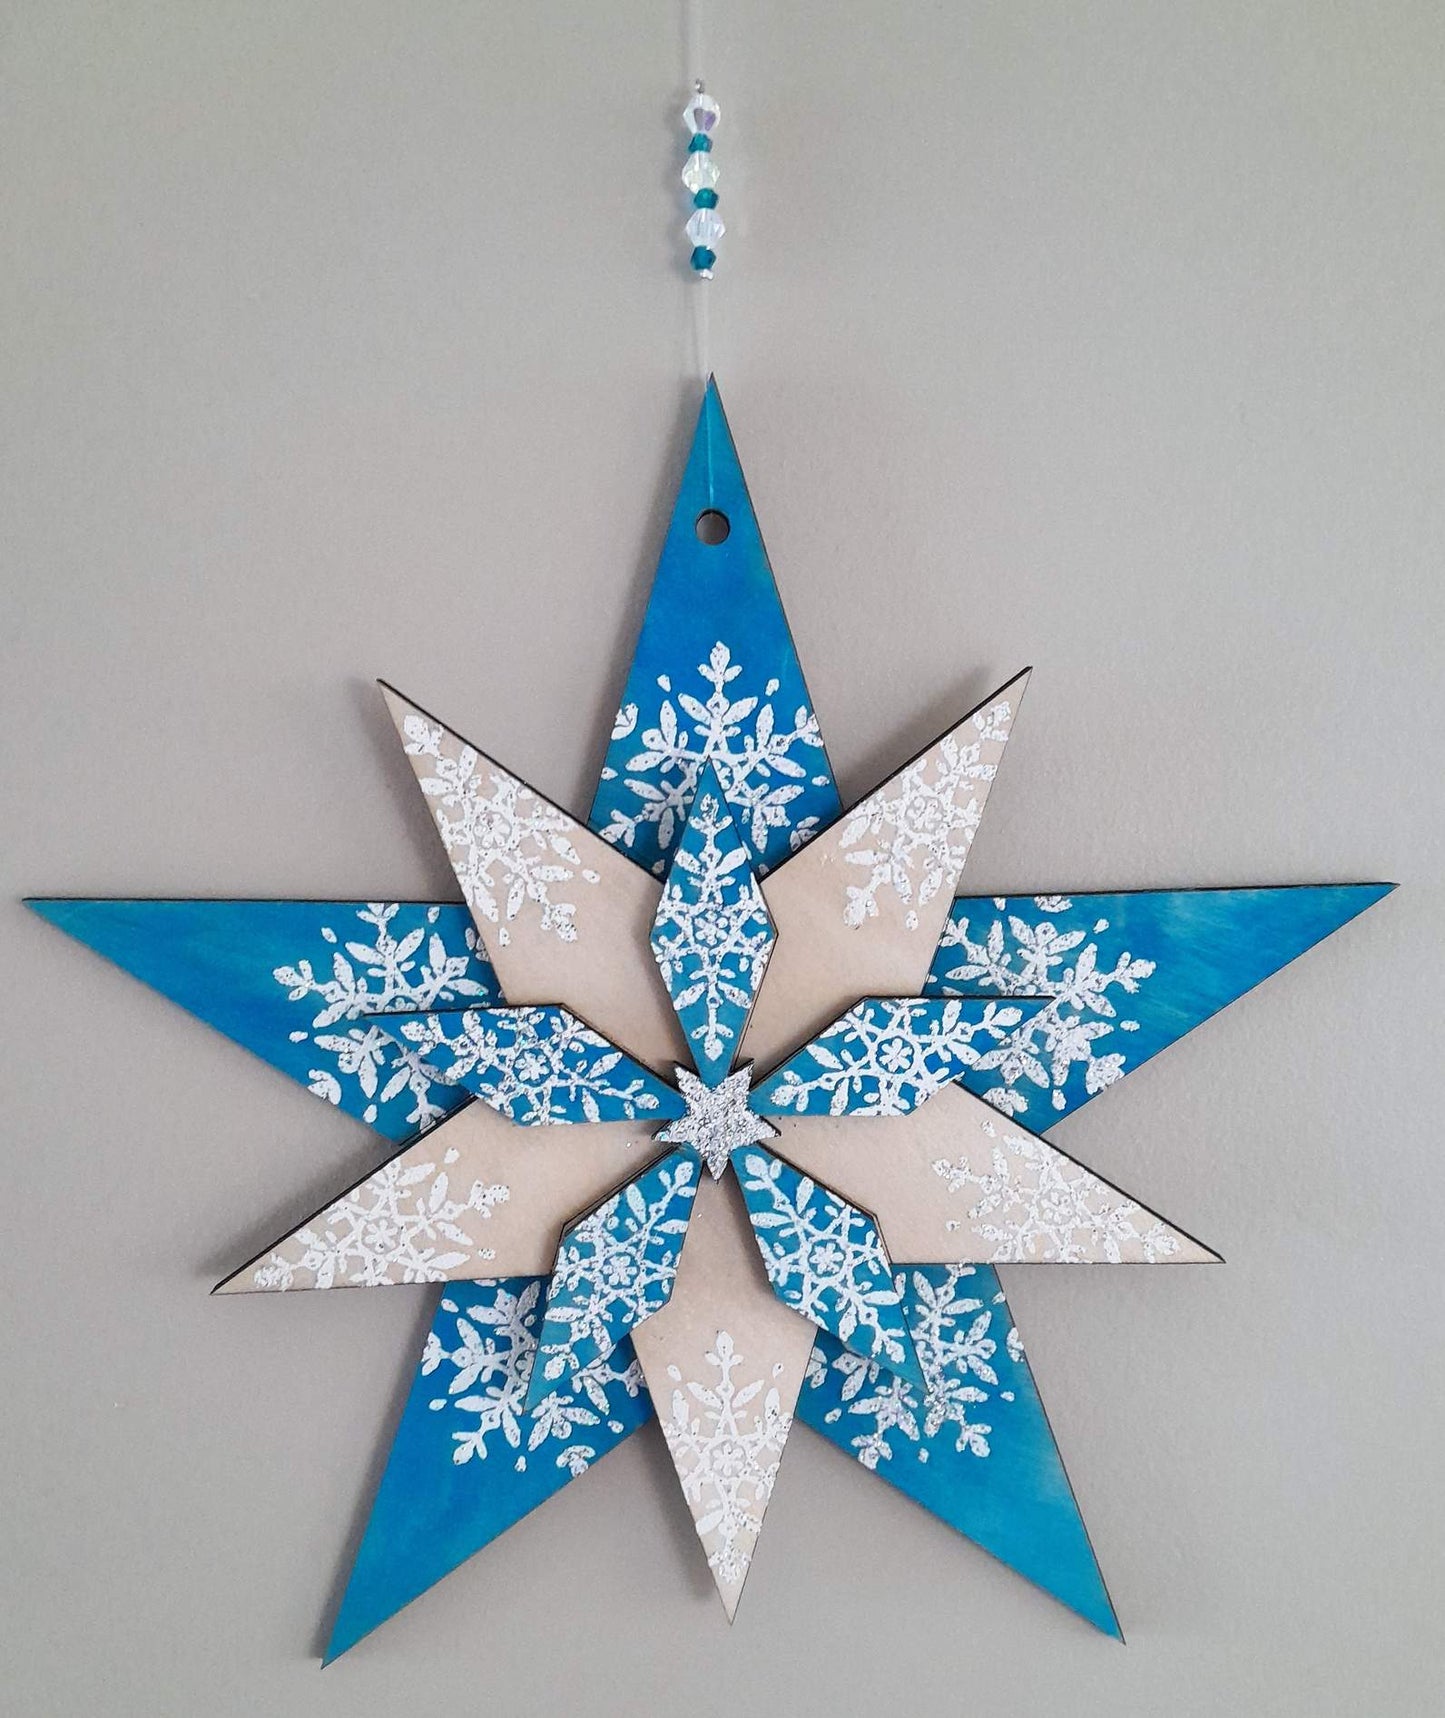 Large Hand made wooden star - tuquoise, white and natural wood